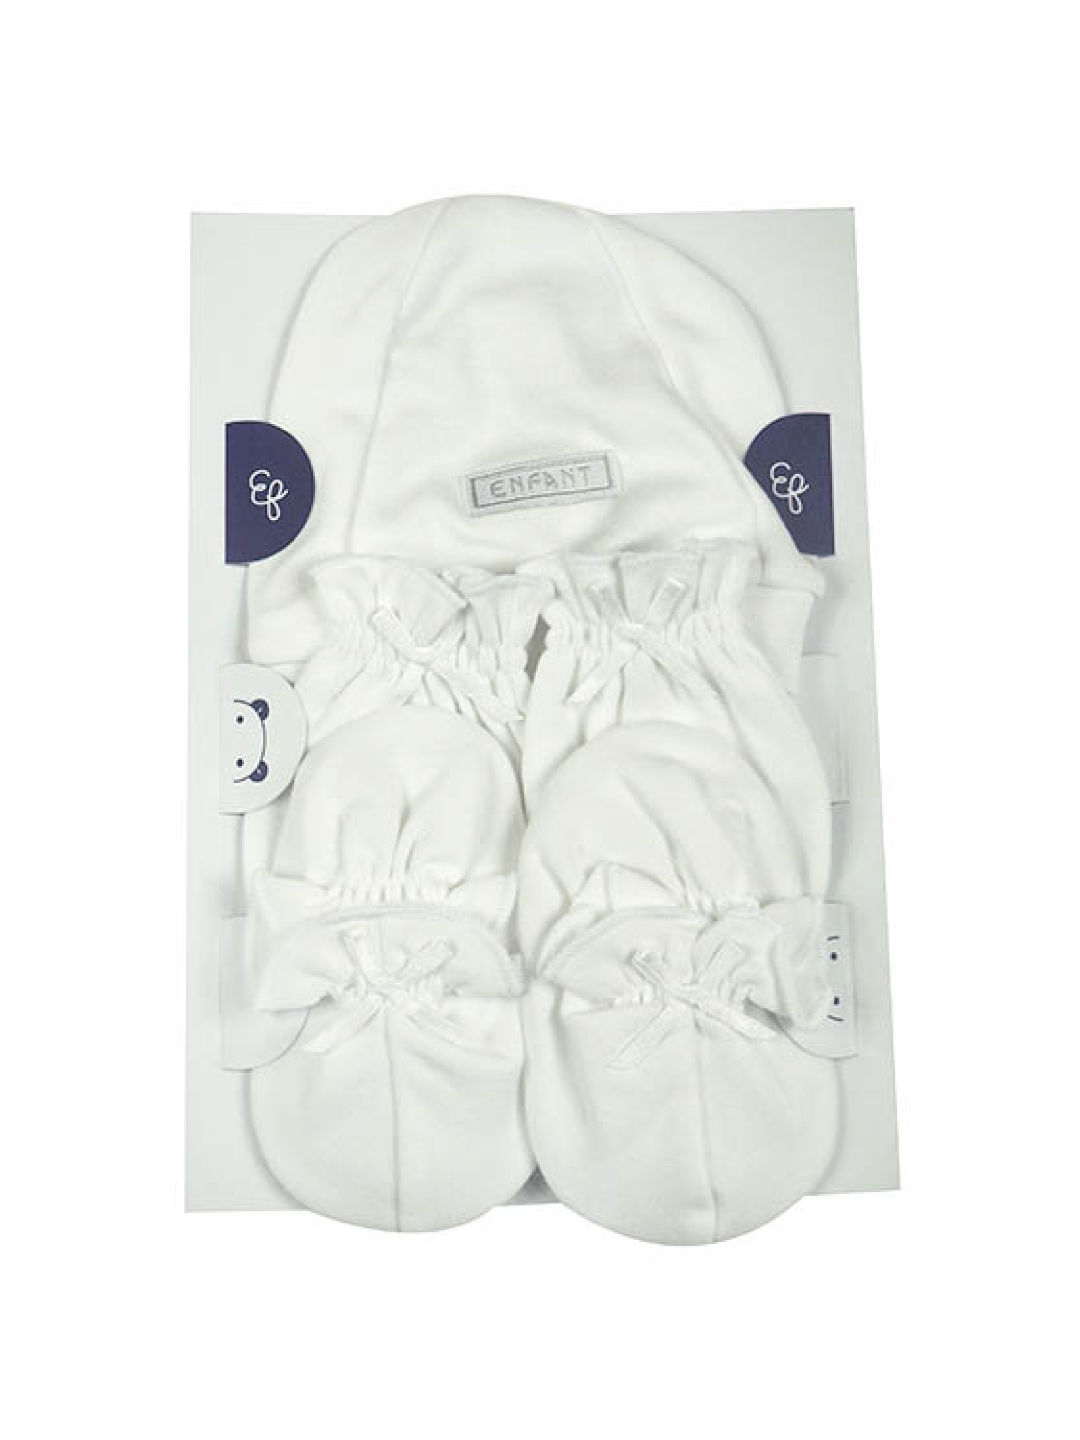 Enfant Cotton Baby Clothing Set - Bonnet, Mittens, and Booties